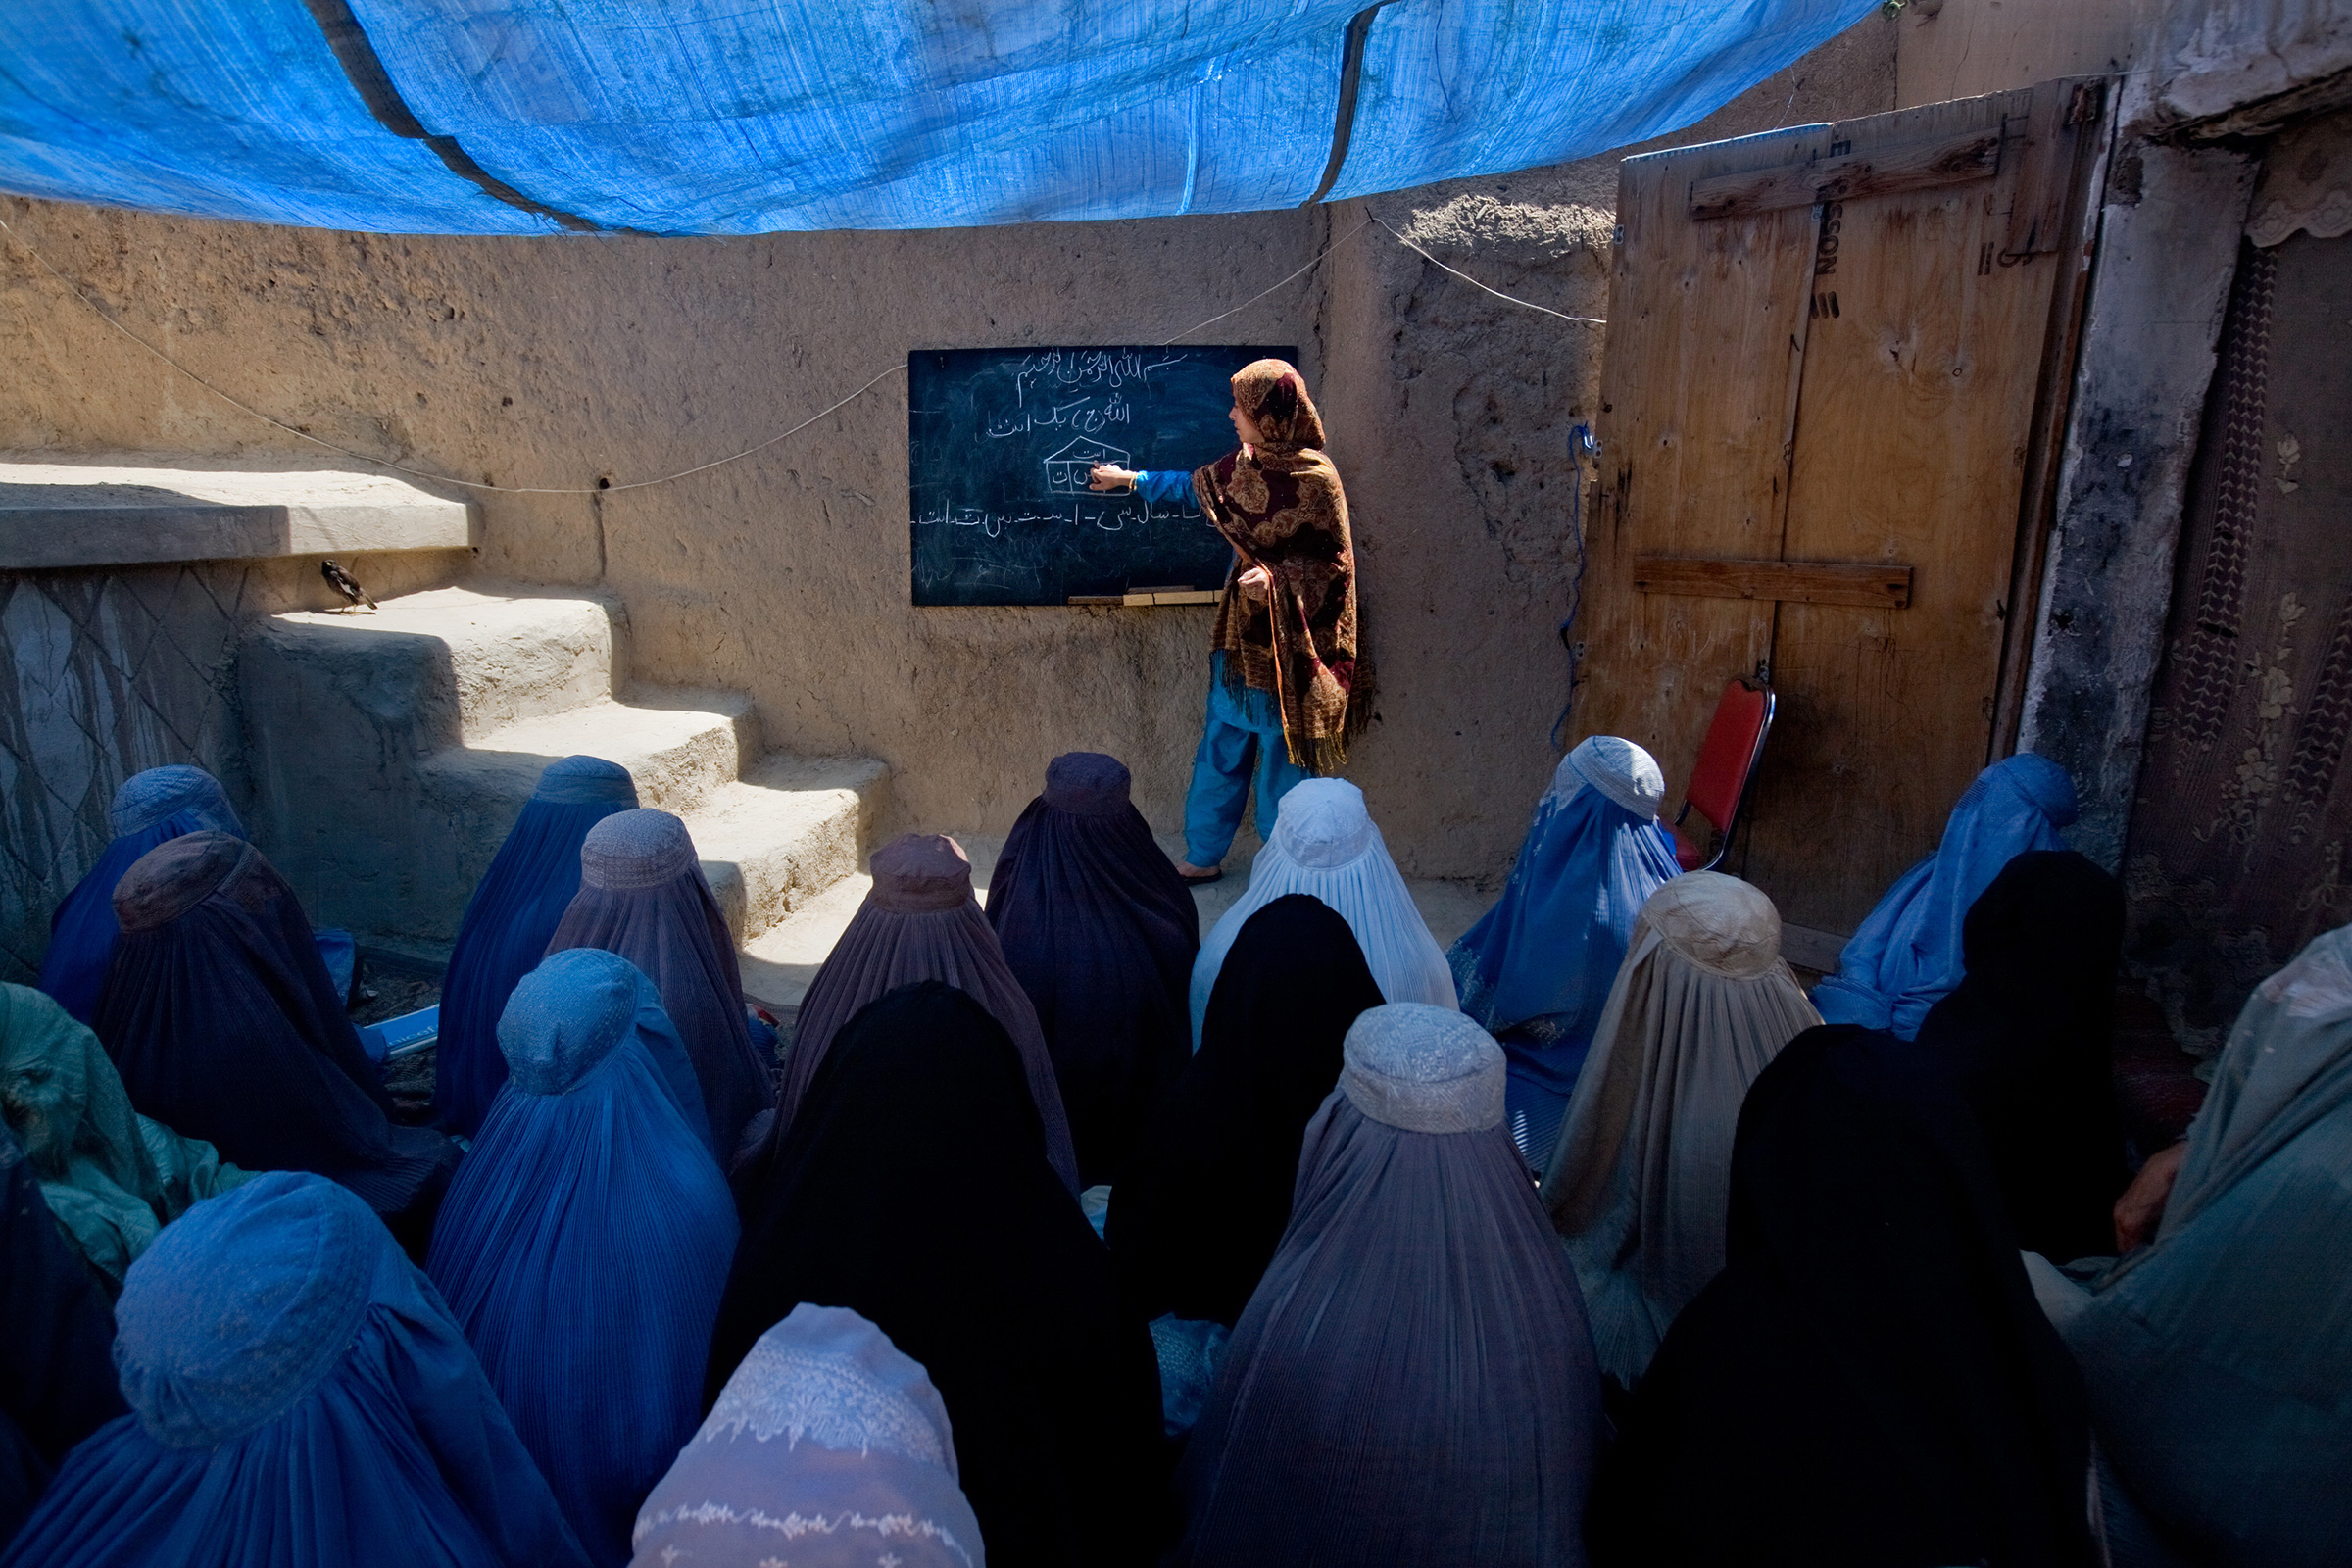 Marzia teaches first grade at a private residence in Kandahar on April 20, 2009. Security concerns prompt the girls to wear burqas when outsiders visit, but Marzia refused to wear hers. Deteriorating security and a shortage of schools for girls have prompted discreet classrooms to spring up in area homes. (Holly Pickett—Redux)